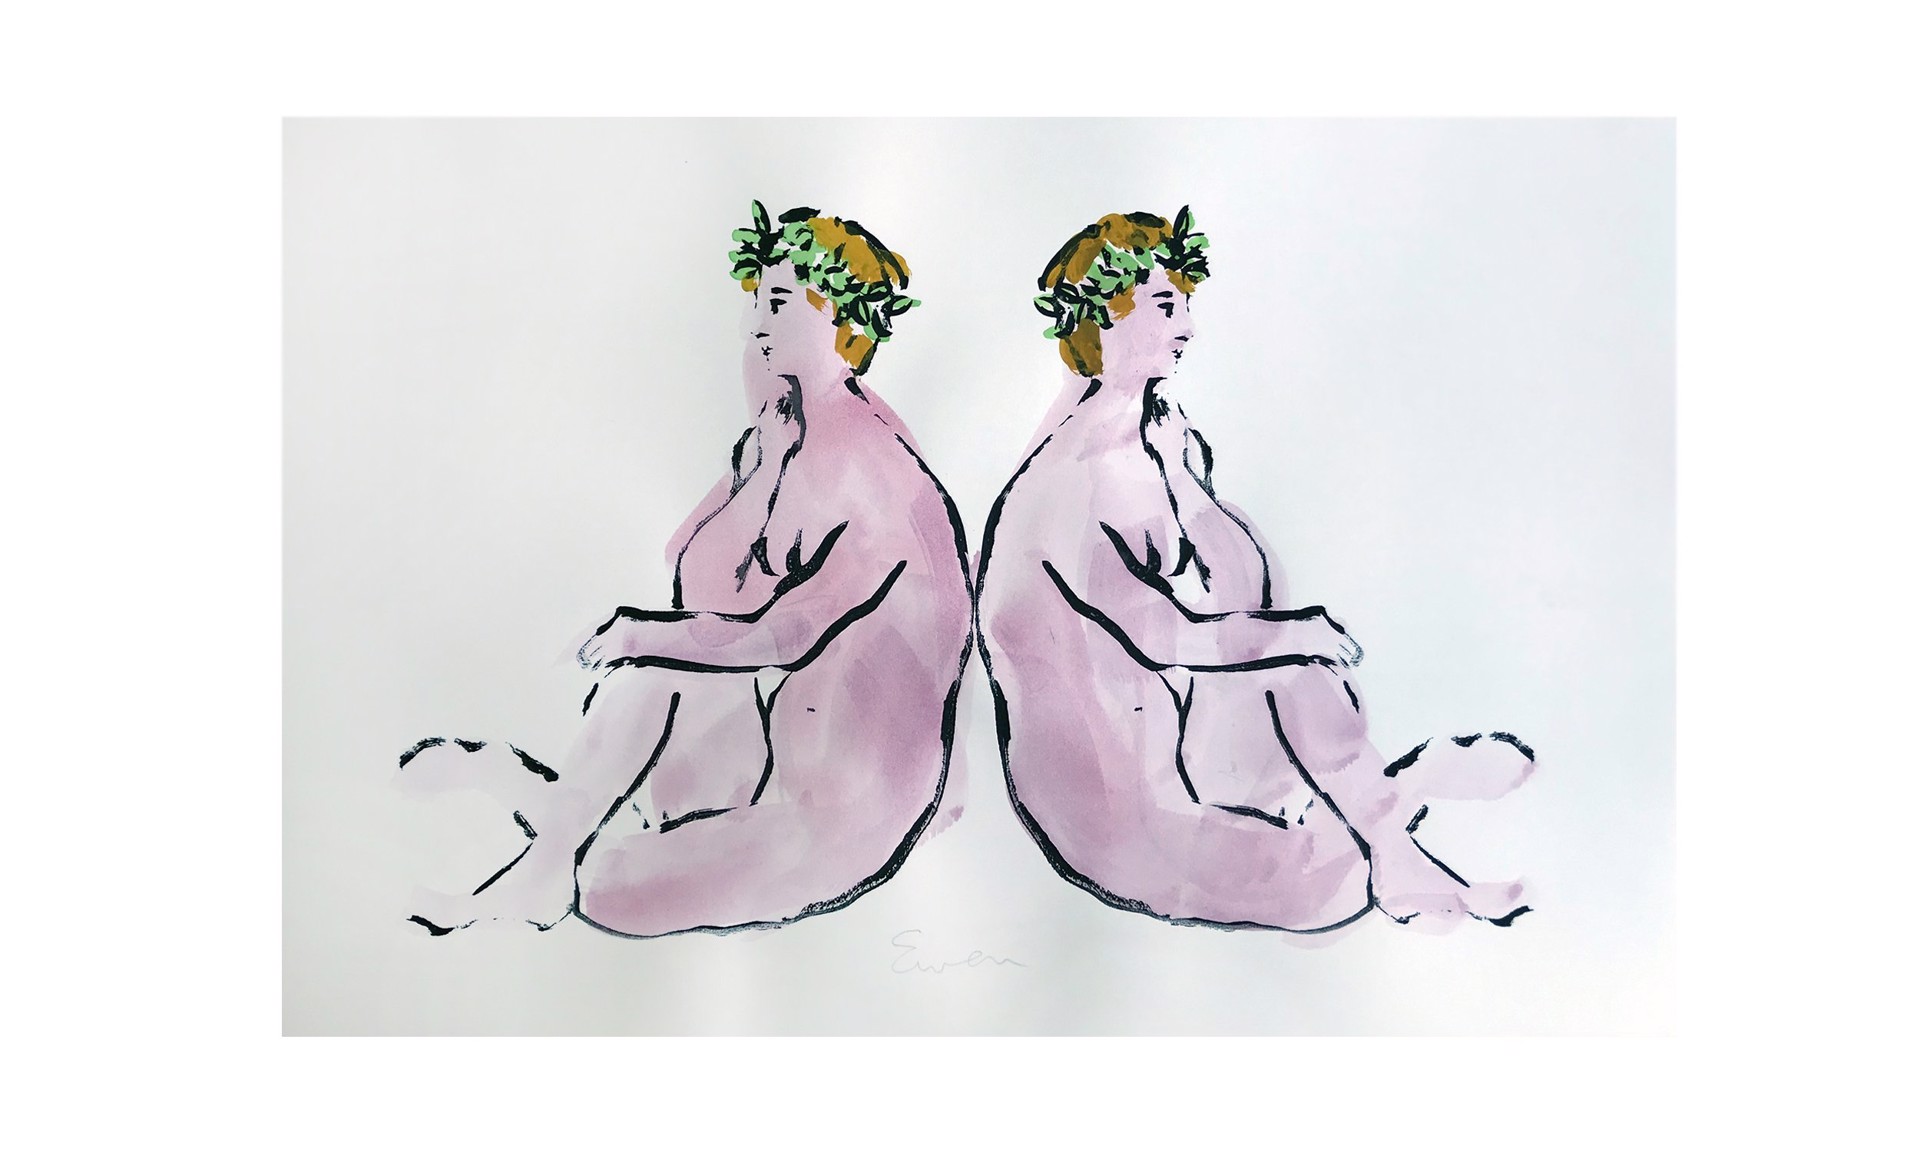 Gemini Twins (Picasso Study) by ANNE-LOUISE EWEN